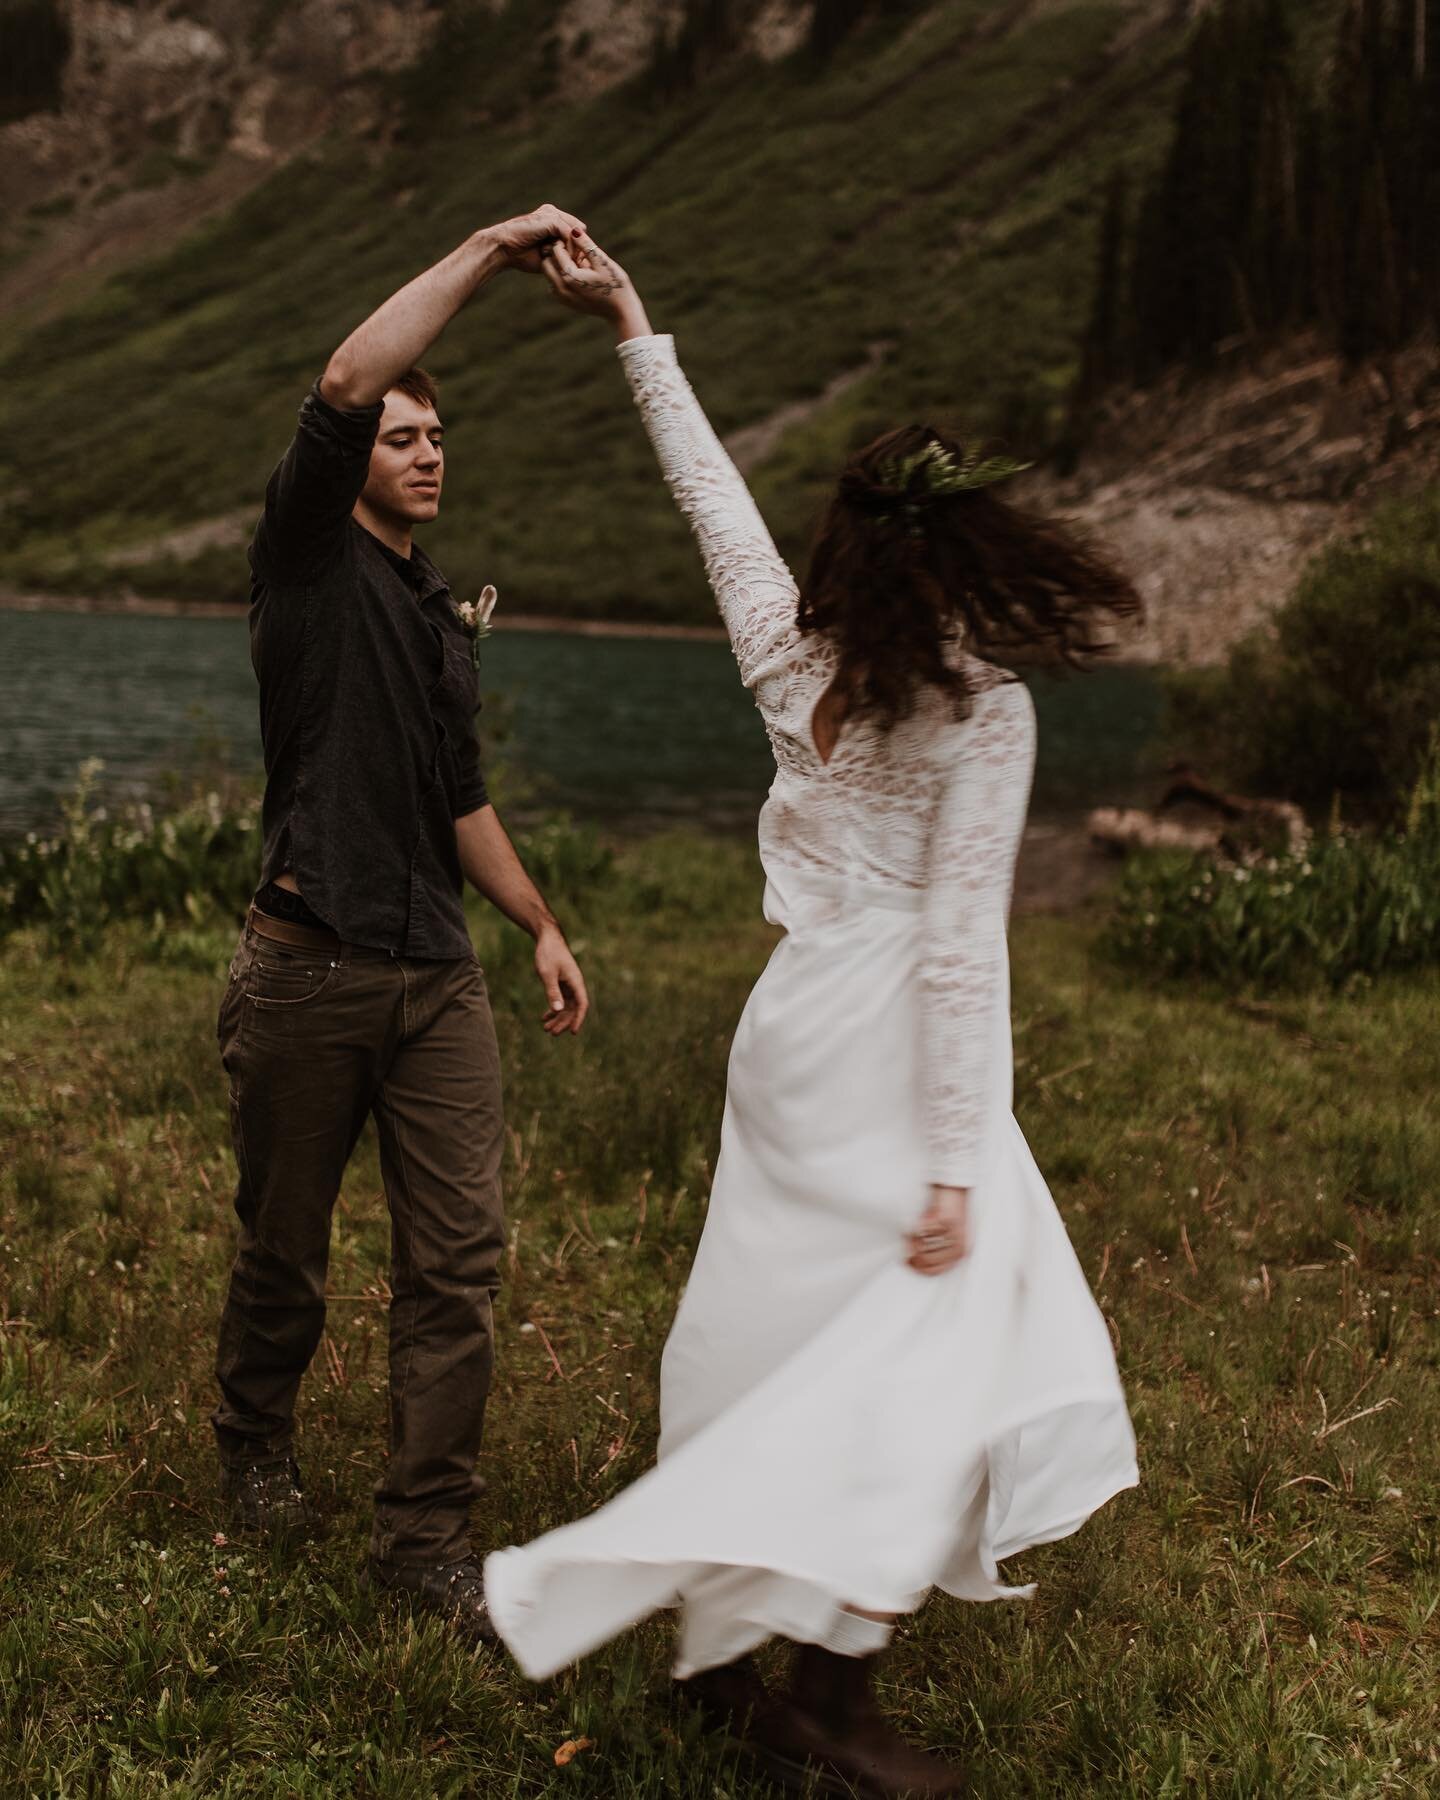 One of my fav places to shoot ⛰🌞🌼💐🌛
.
.
.
.
.
.
.
.
#tellurideelopement #tellurideelopementphotographer #tellurideweddingphotographer #ourayelopement #ourayelopementphotographer
#crestedbutteelopement #crestedbutteelopementphotographer #crestedbu